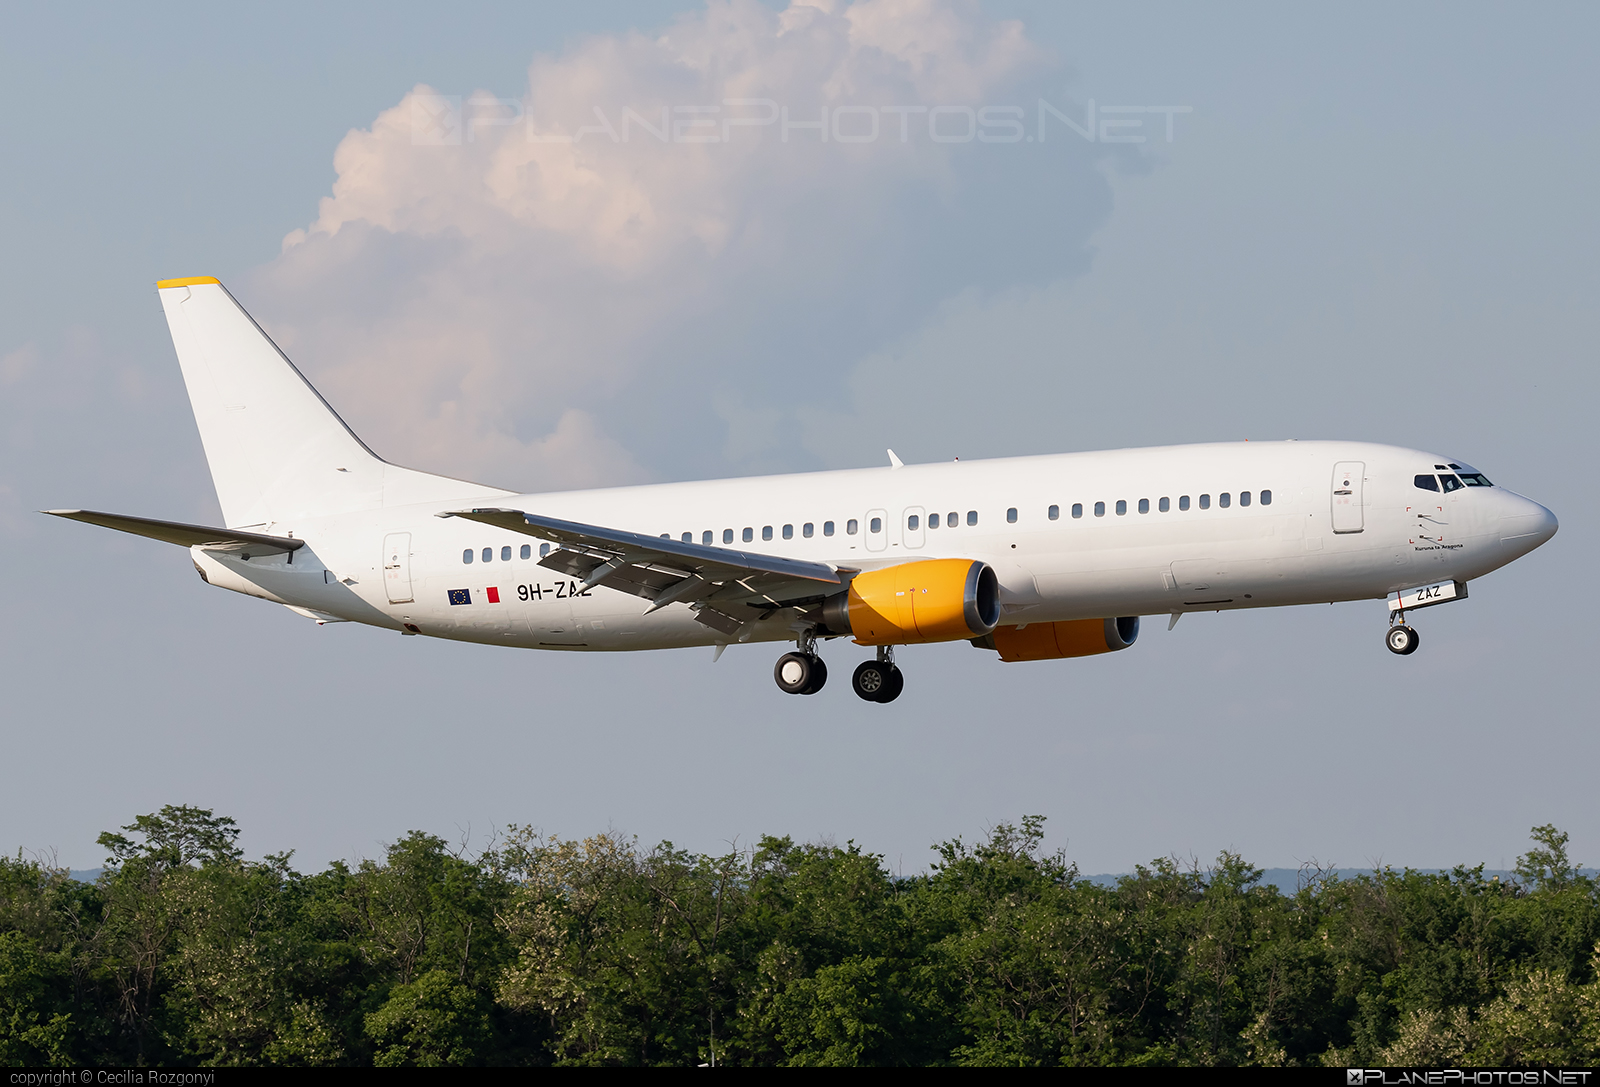 Boeing 737-400 - 9H-ZAZ operated by Air Horizont #b737 #boeing #boeing737